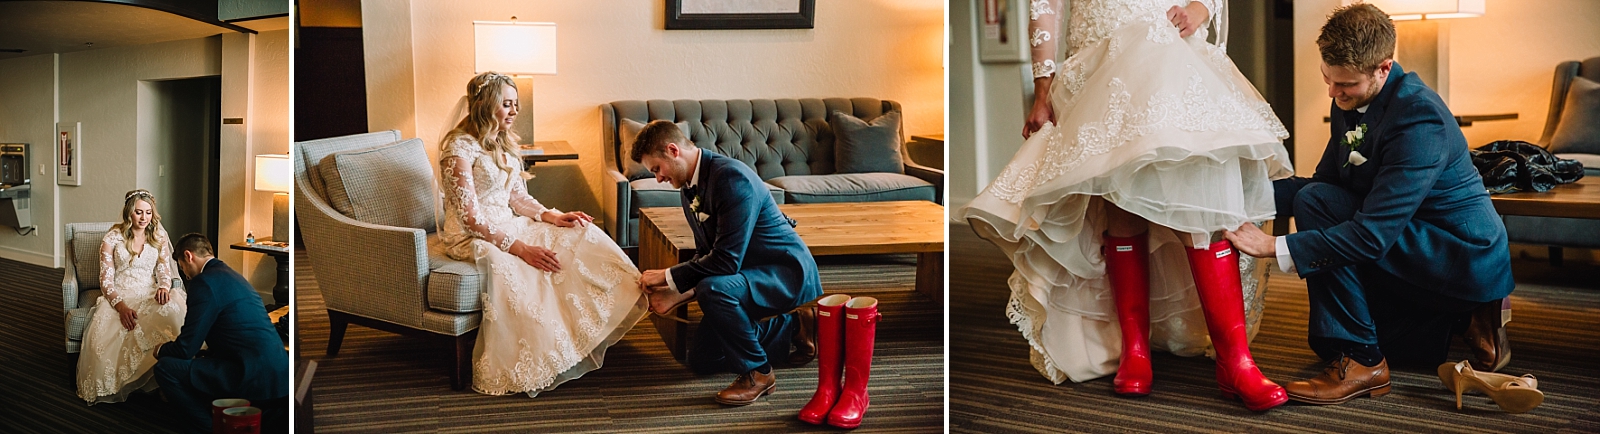 groom serving bride wedding day red boots wyoming